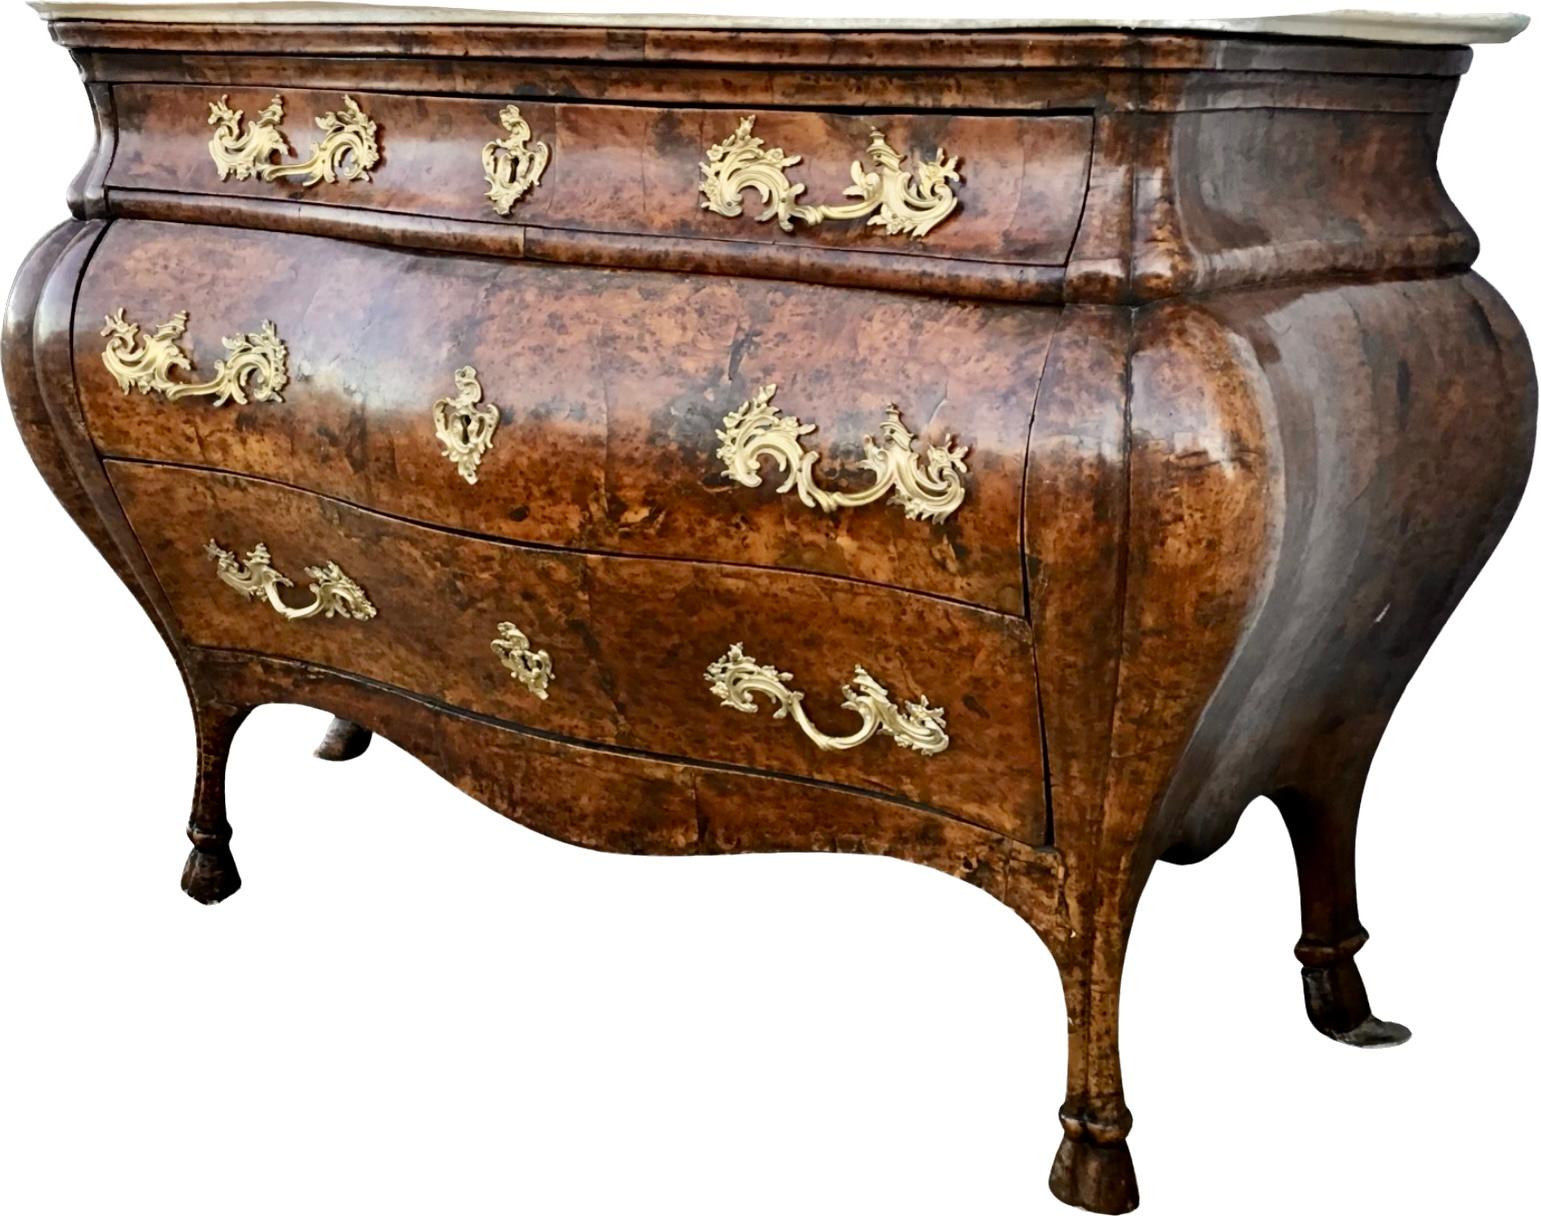 Stunning 18th C. Italian Rococo Bombe Commode For Sale 1